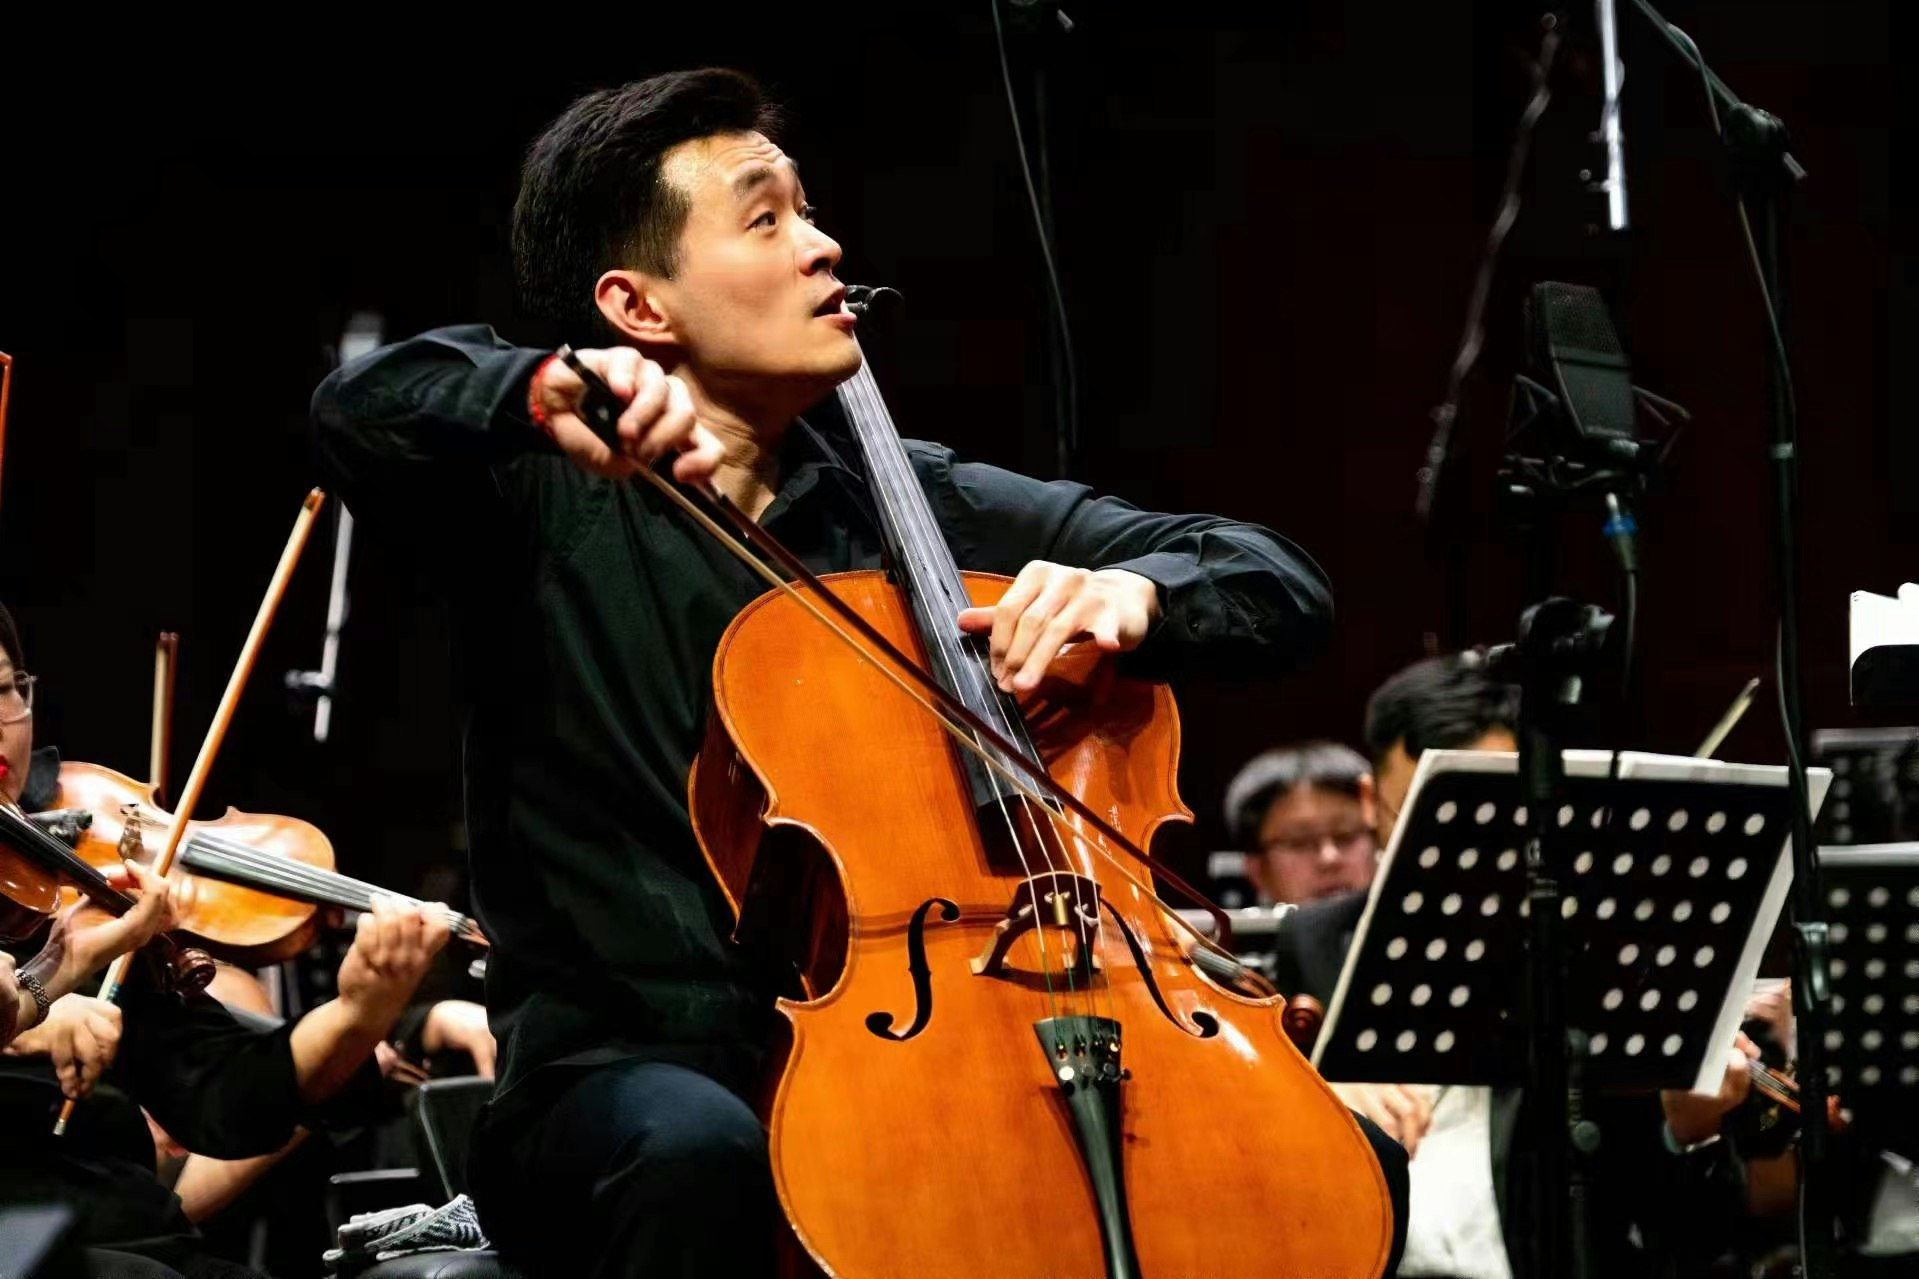 A man with short darrk hair sits on a chair. He is playing a chello in an orchestral performance